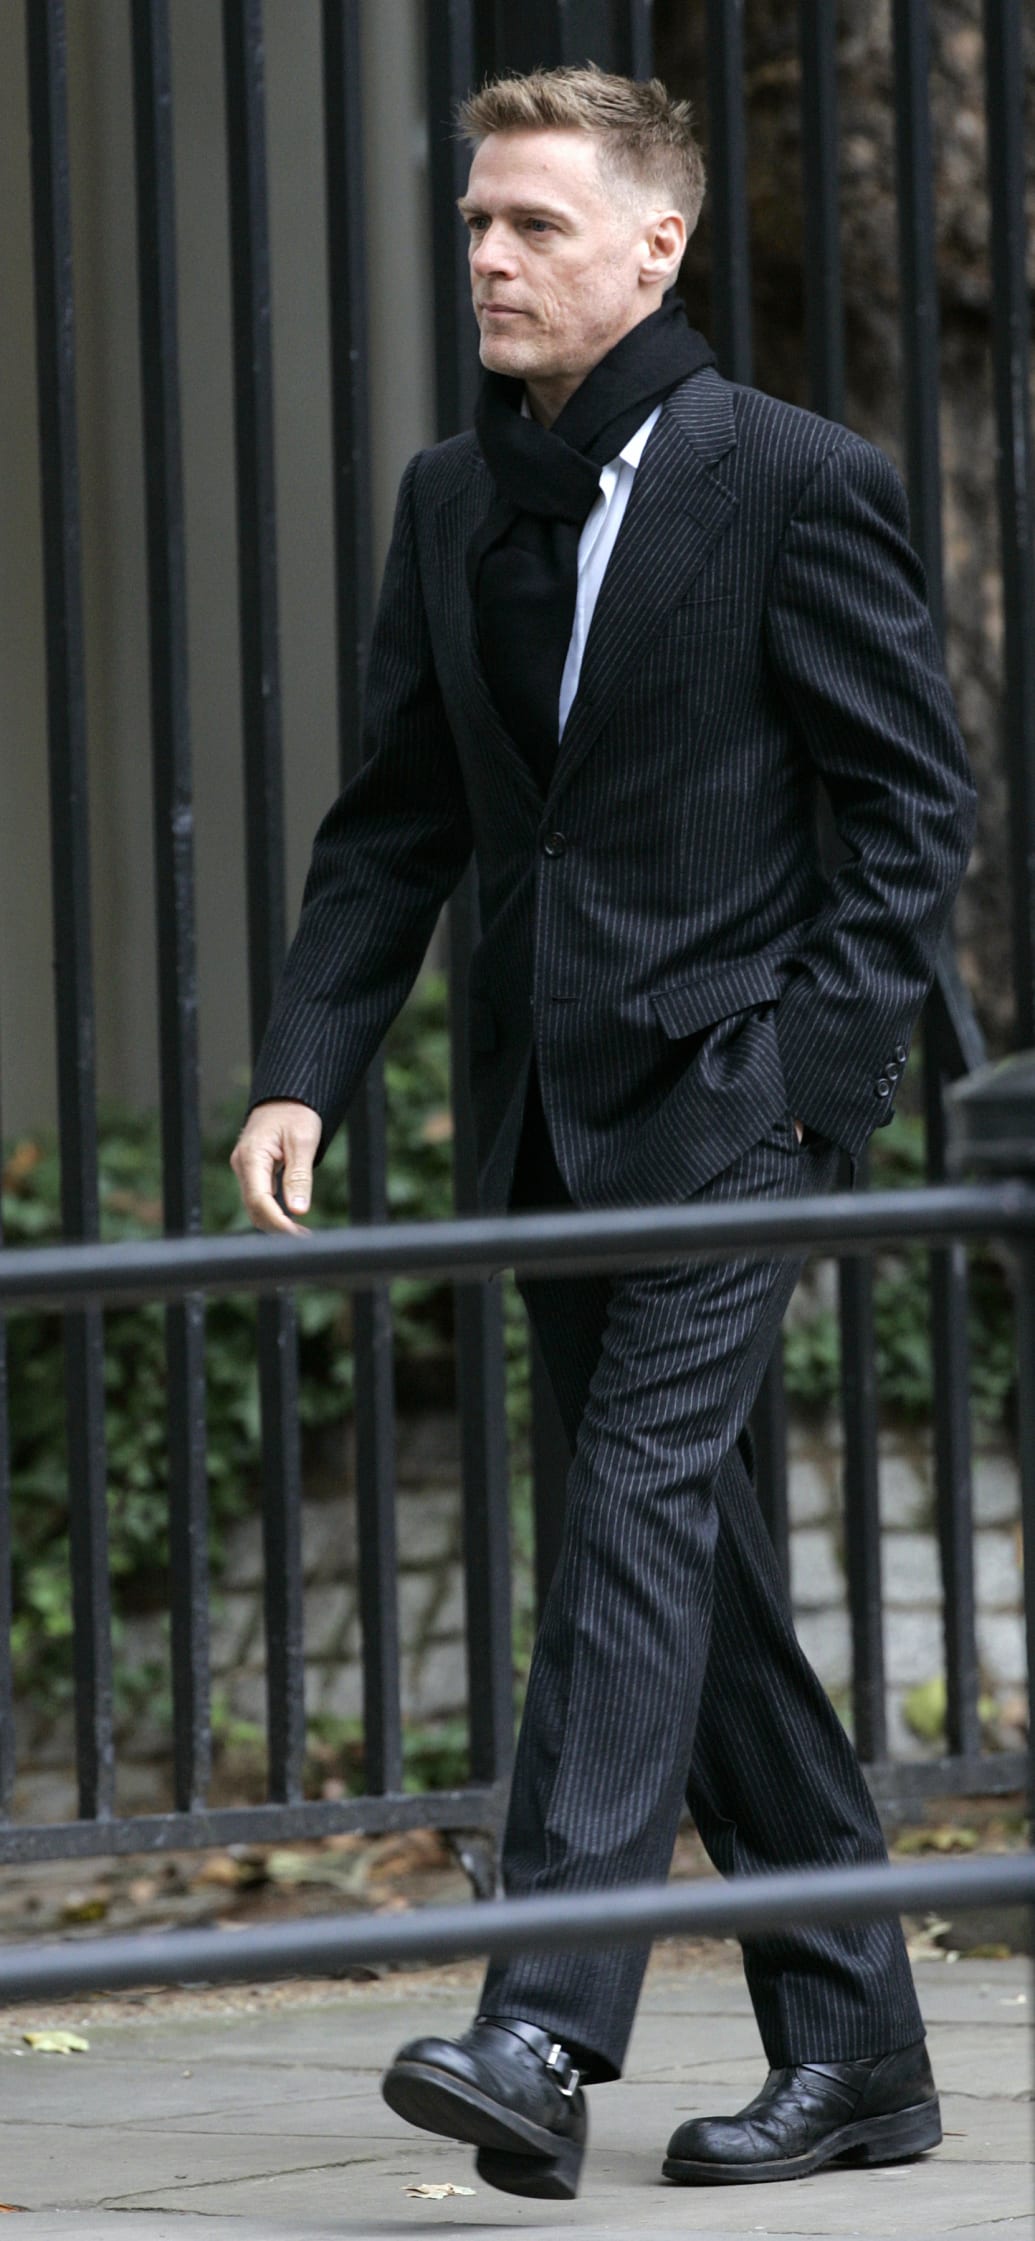 Bryan Adams arrives for the Service of Thanksgiving for the Life of Diana at the Guards' Chapel at Wellington Barracks in London, August 31, 2007.